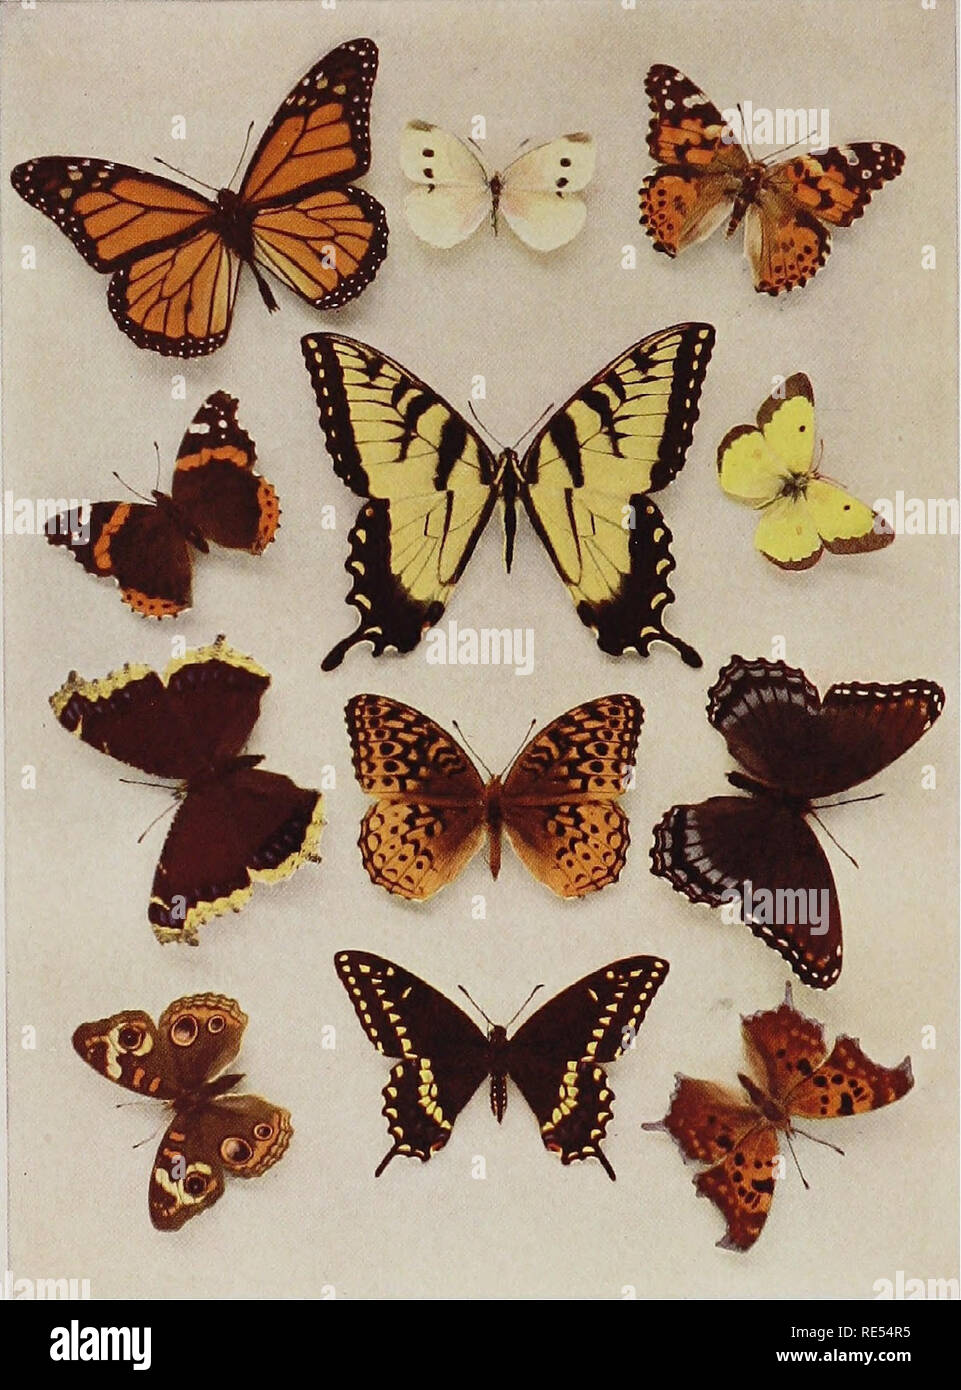 Nature-study; a manual for teachers and students. Nature study. Monarch, S  yhiL&gt;su&gt; ^/Â£.X!/yitS. Red admiral, .-^ r.niir^s.i iila.'a'!la.  Mnuming cloak, .^ Buckeve. V Cahbagp butterfly, V TigtT swallow-tail, ^â ^:  Papilio ,